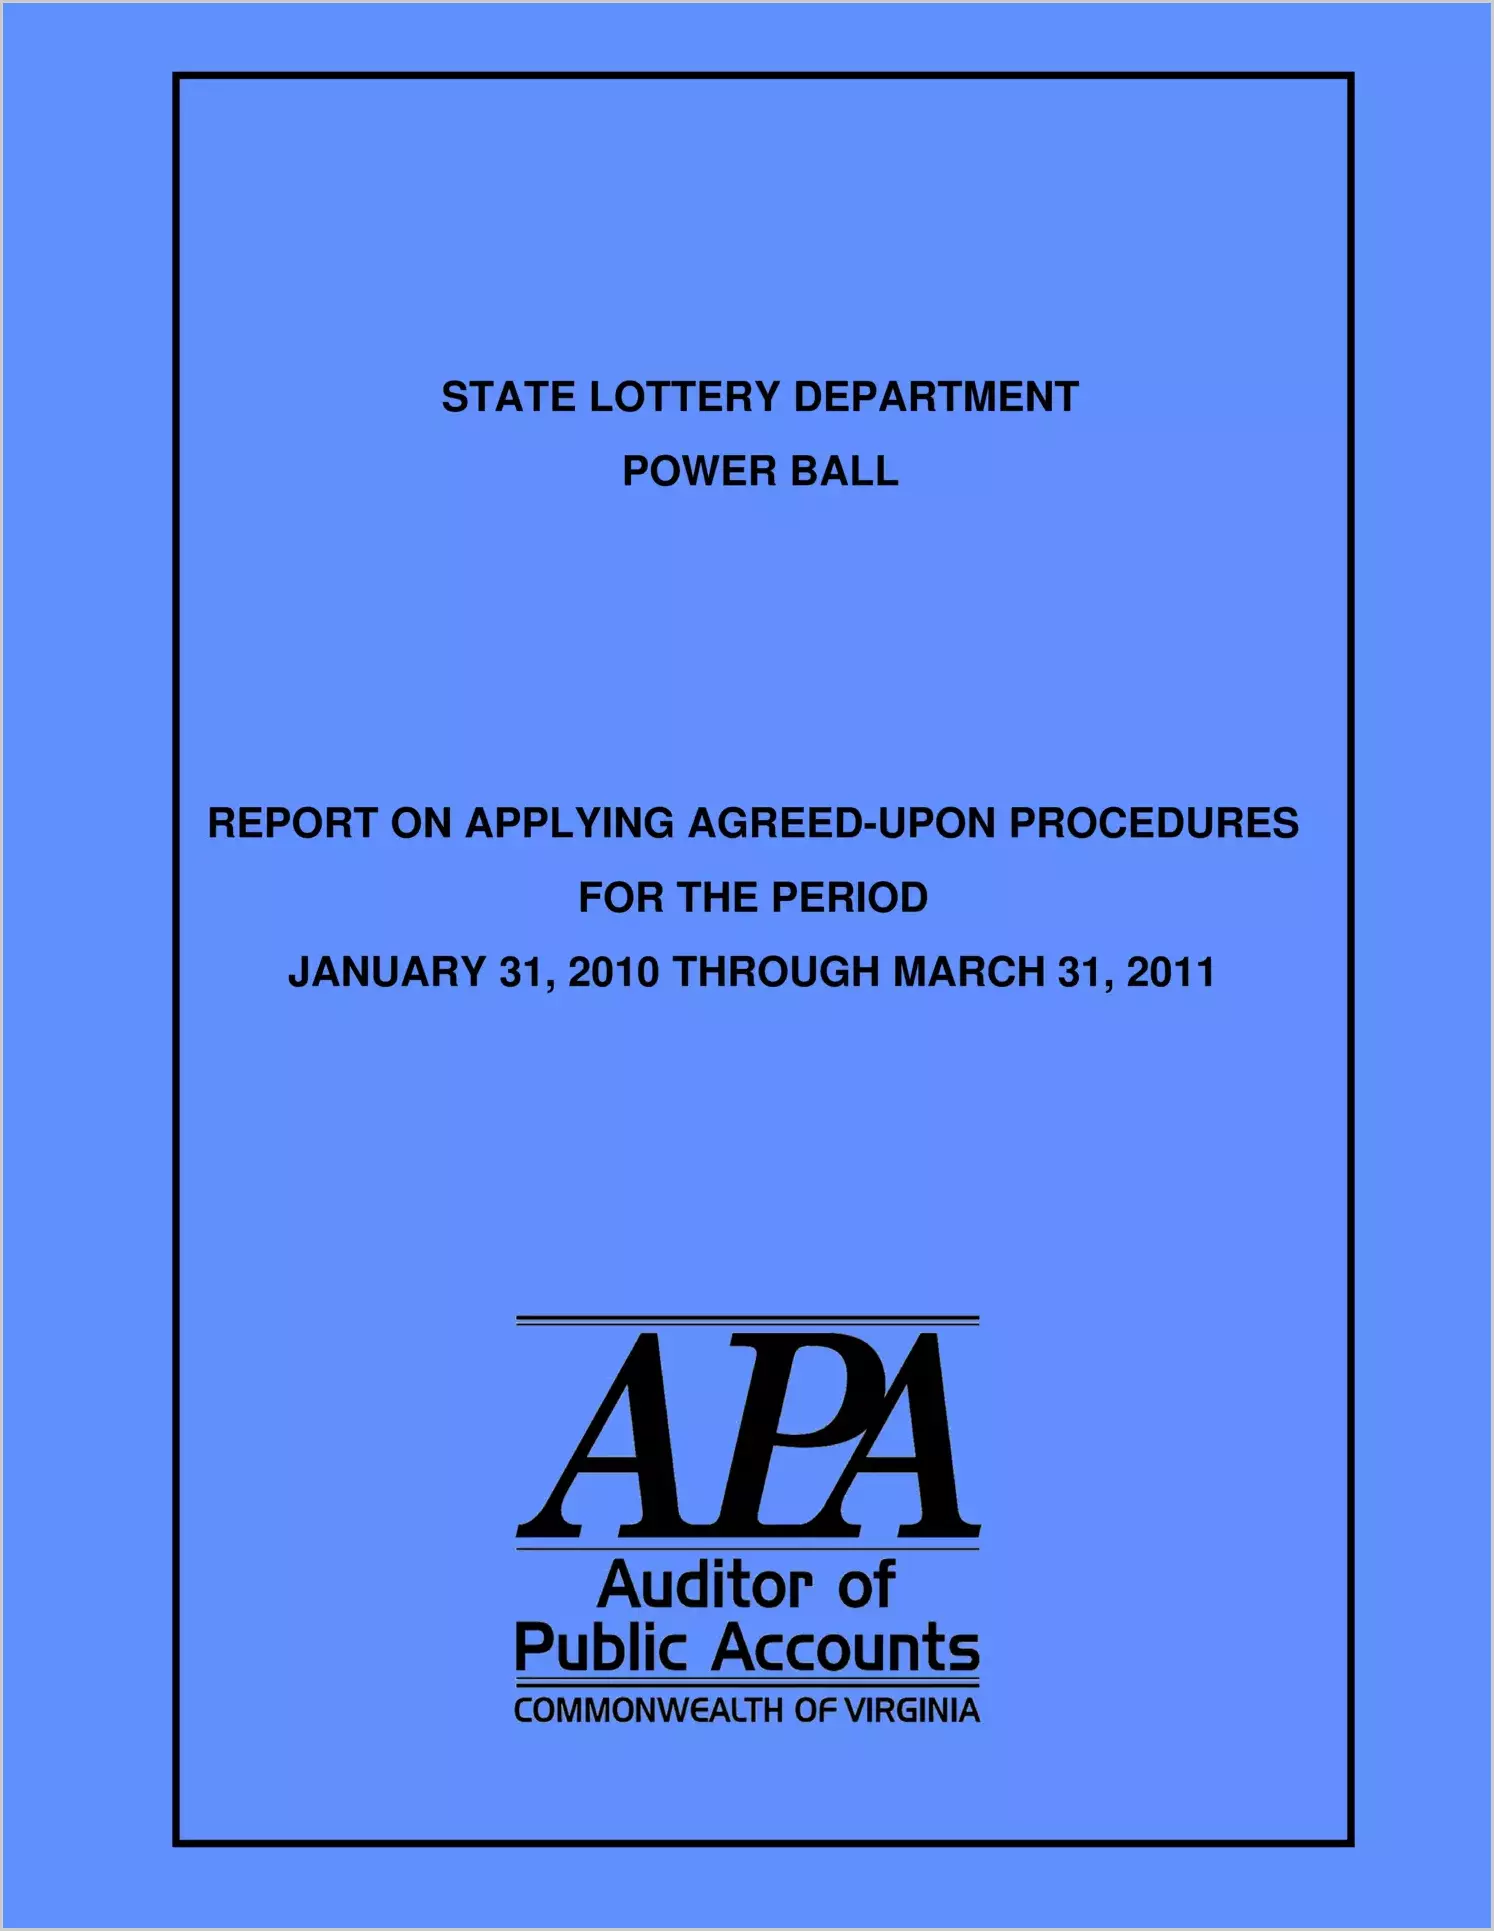 State Lottery Department: Power Ball Report on Applying Agreed-Upon Procedures for the period January 31, 2010 through March 31, 2010